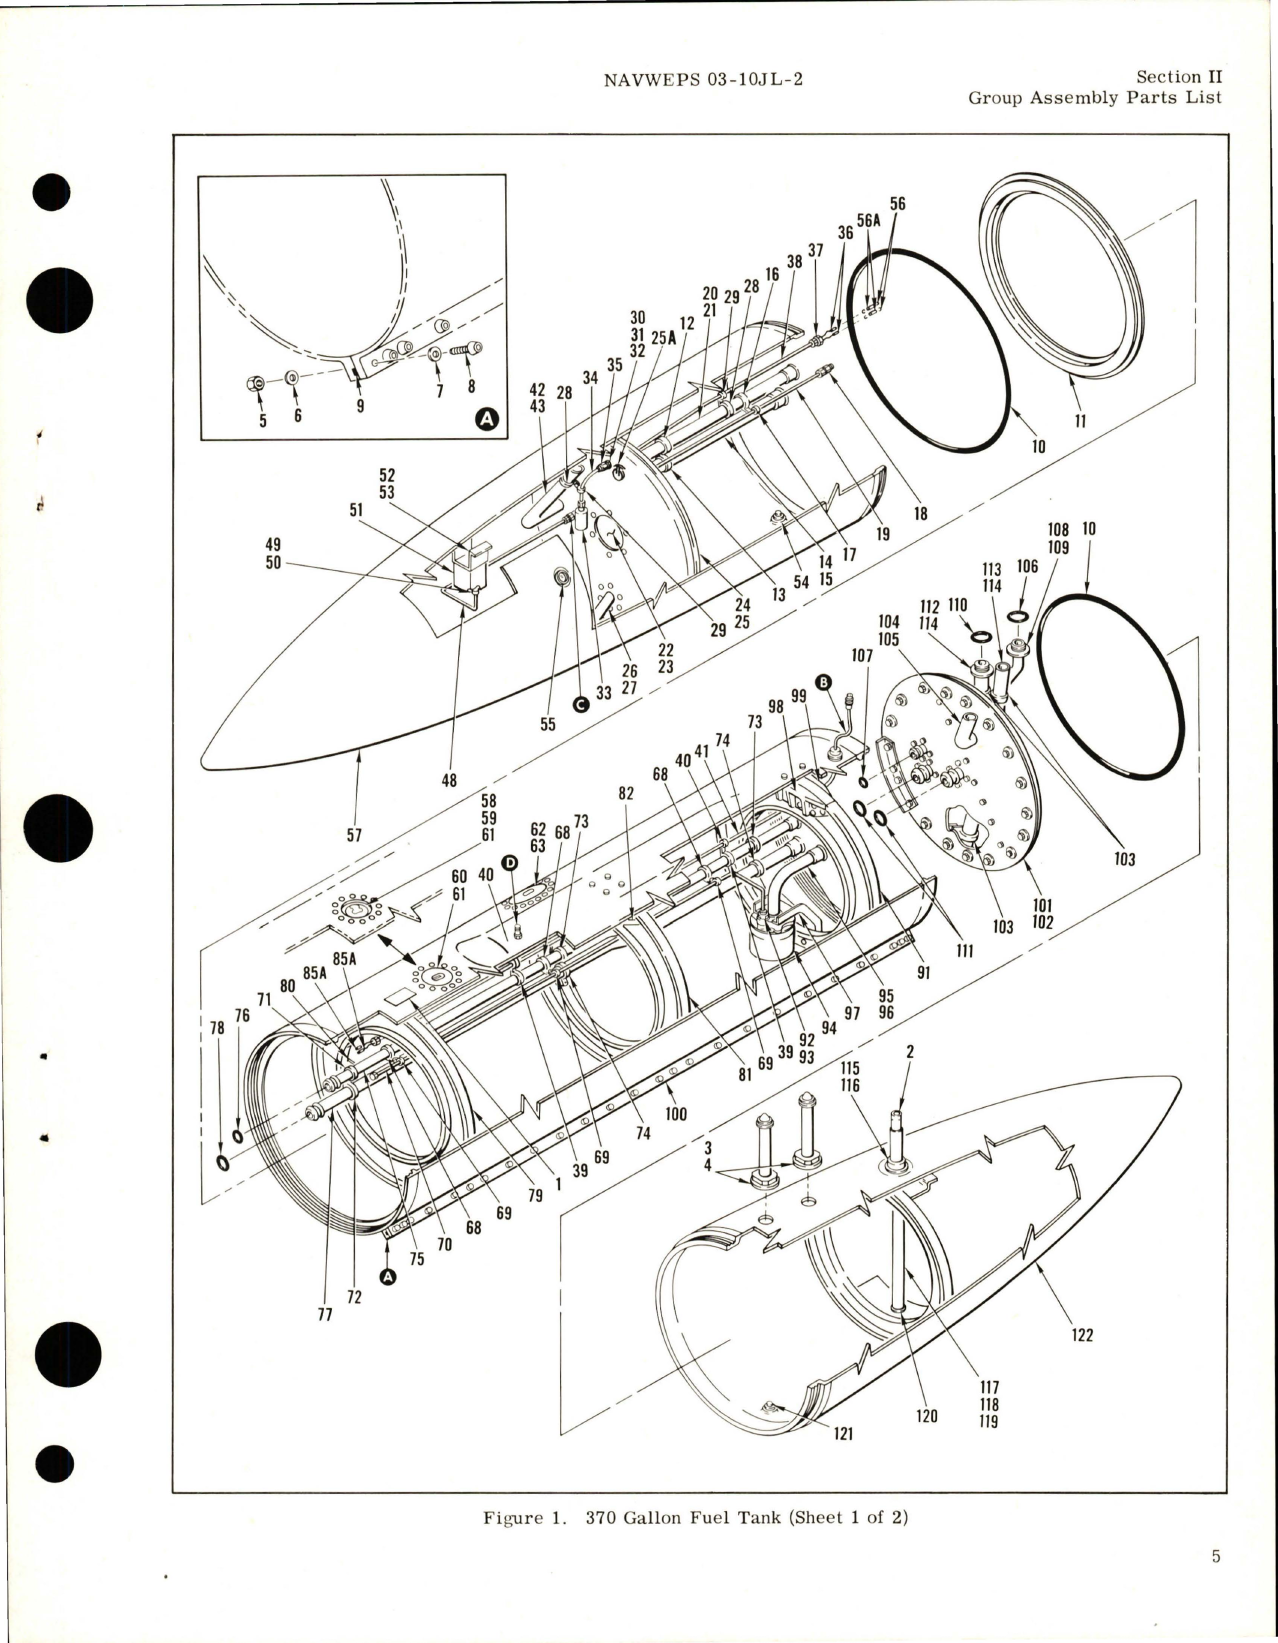 Sample page 7 from AirCorps Library document: Illustrated Parts Breakdown for 370 Gallon Fuel Tank - Parts 501700 and 501700-501